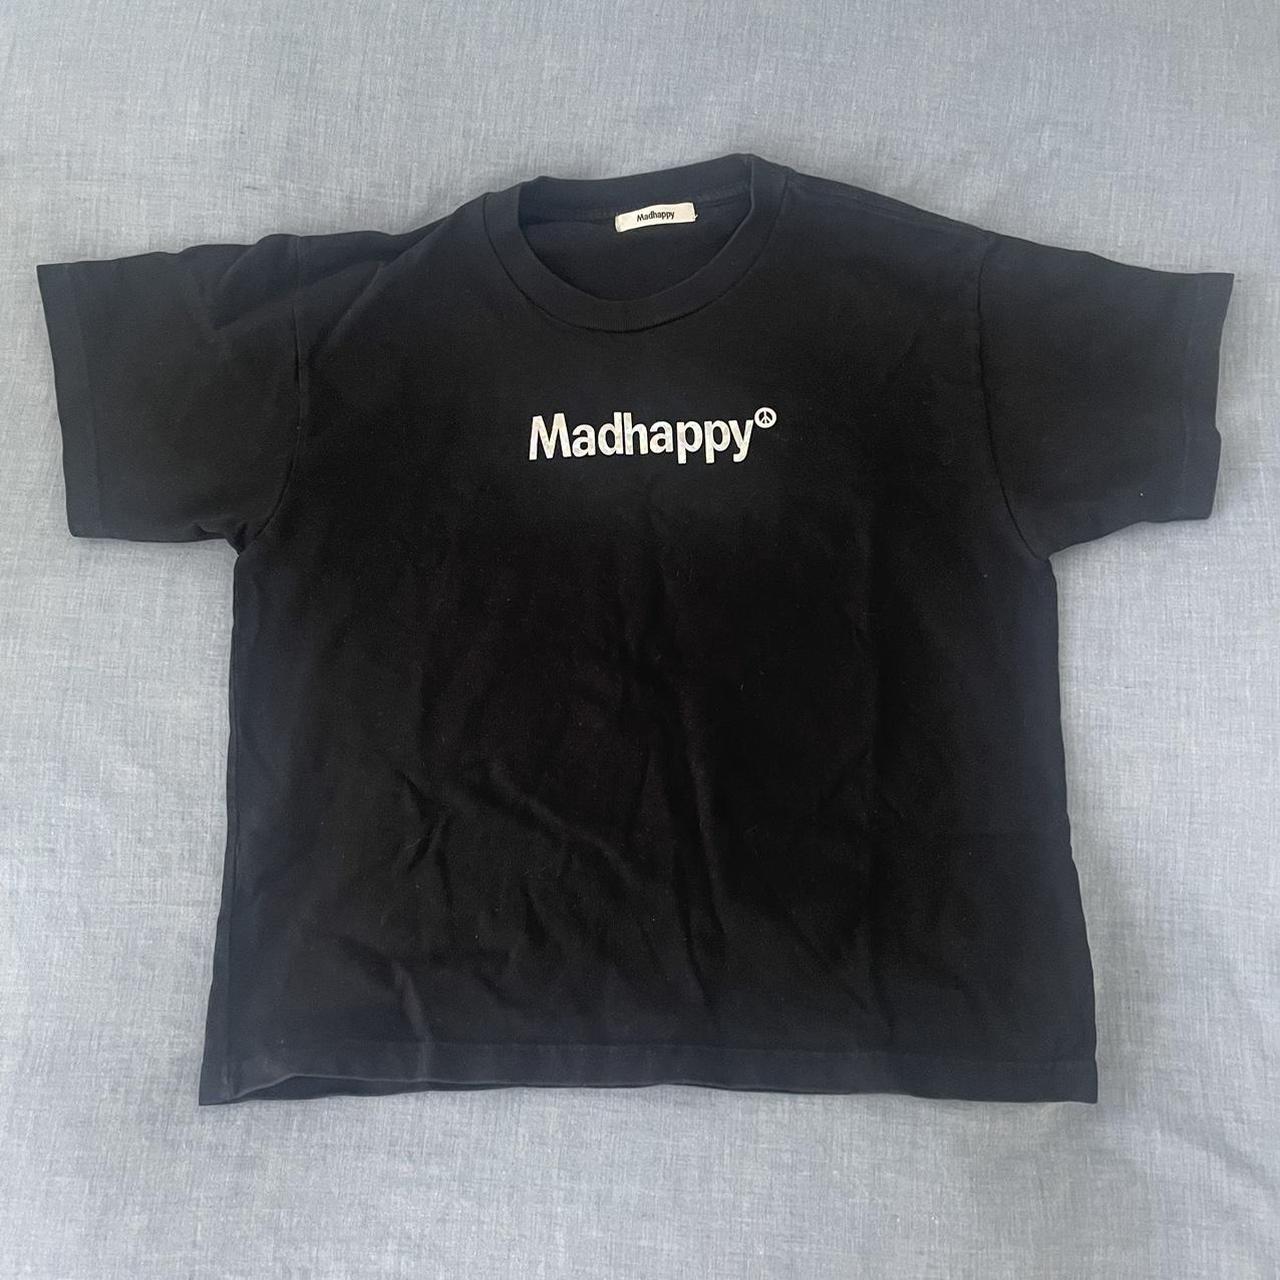 Madhappy Women's Black and Silver T-shirt | Depop